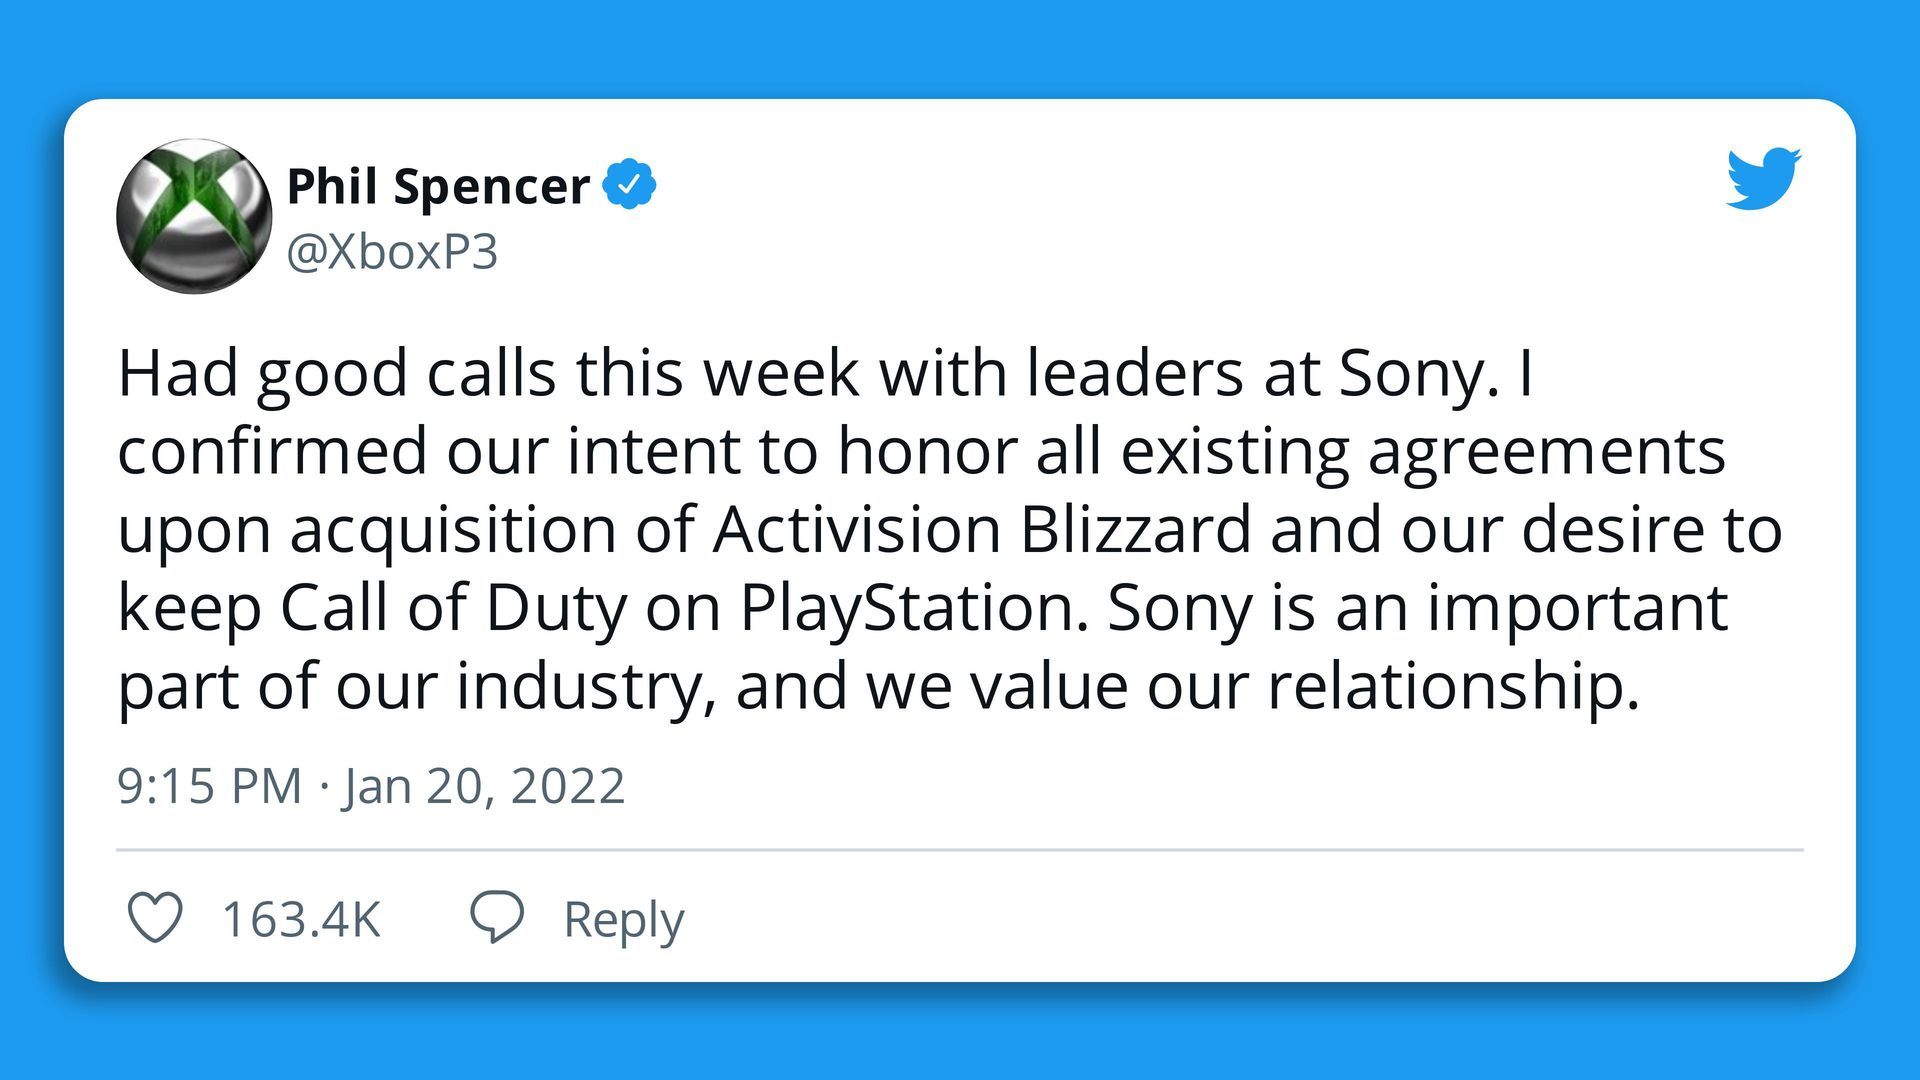 Screenshot of a tweet from Phil Spencer's account against a blue background